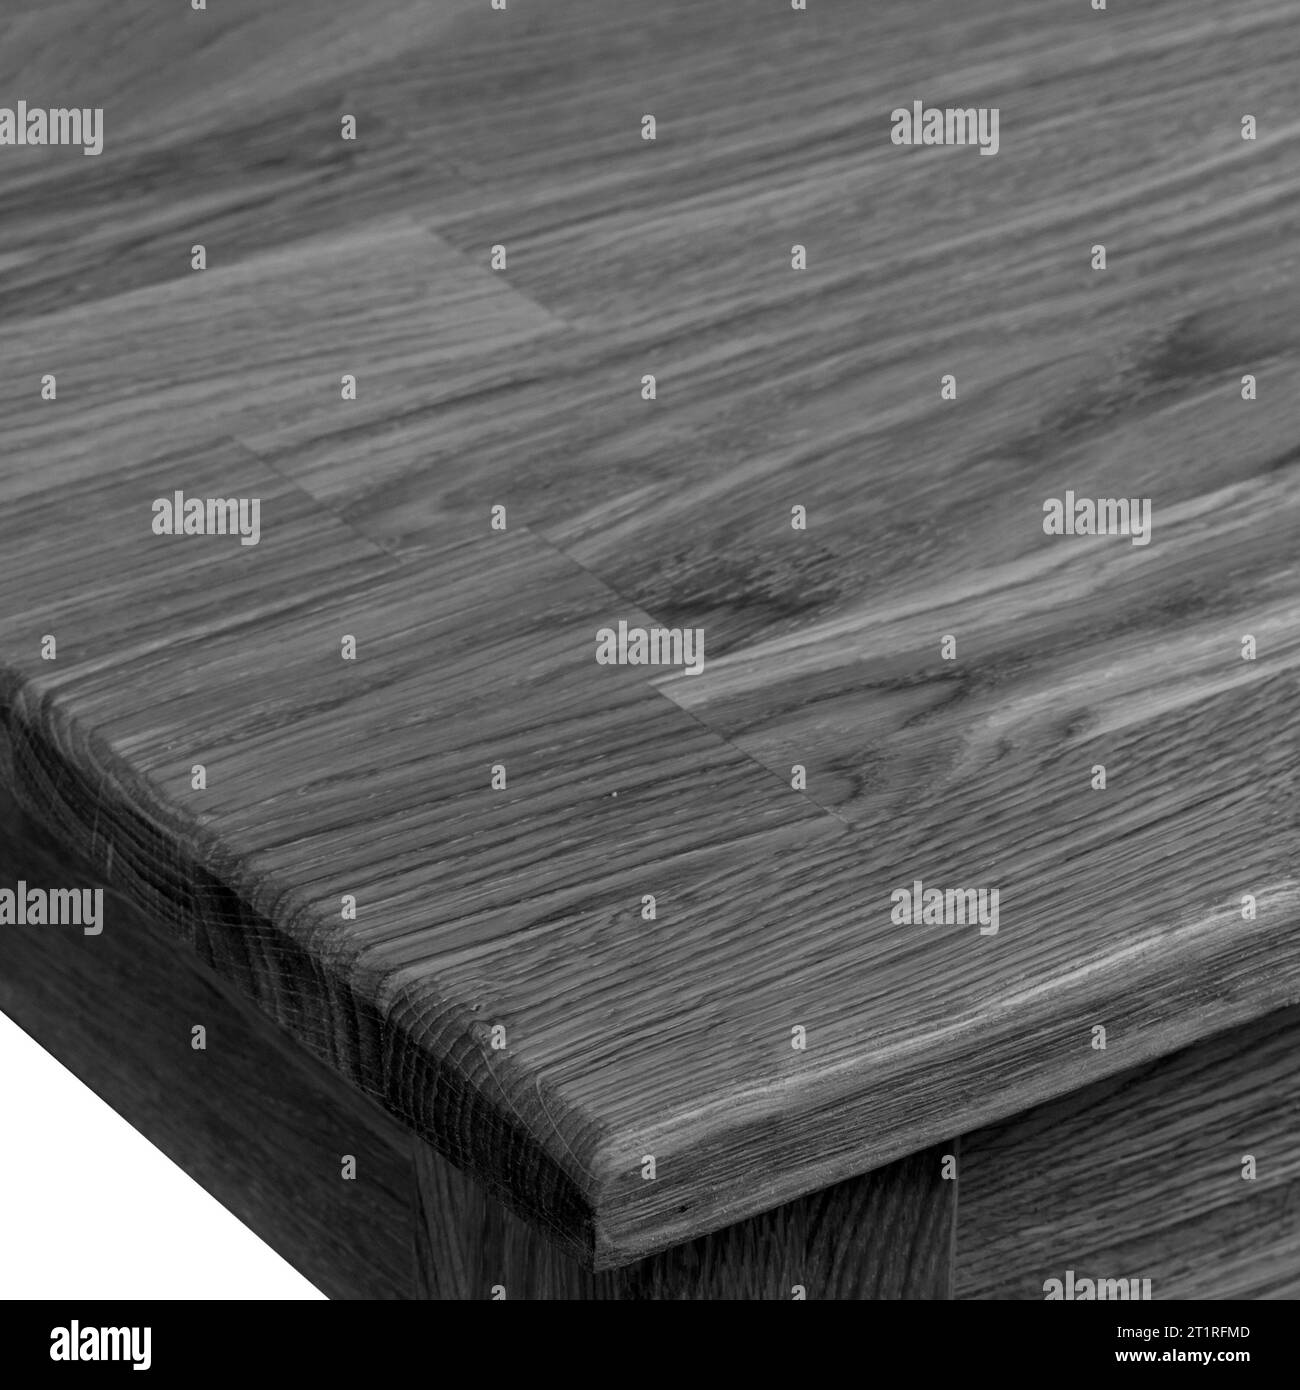 Natural wood texture. Wooden furniture surface black and white background Stock Photo